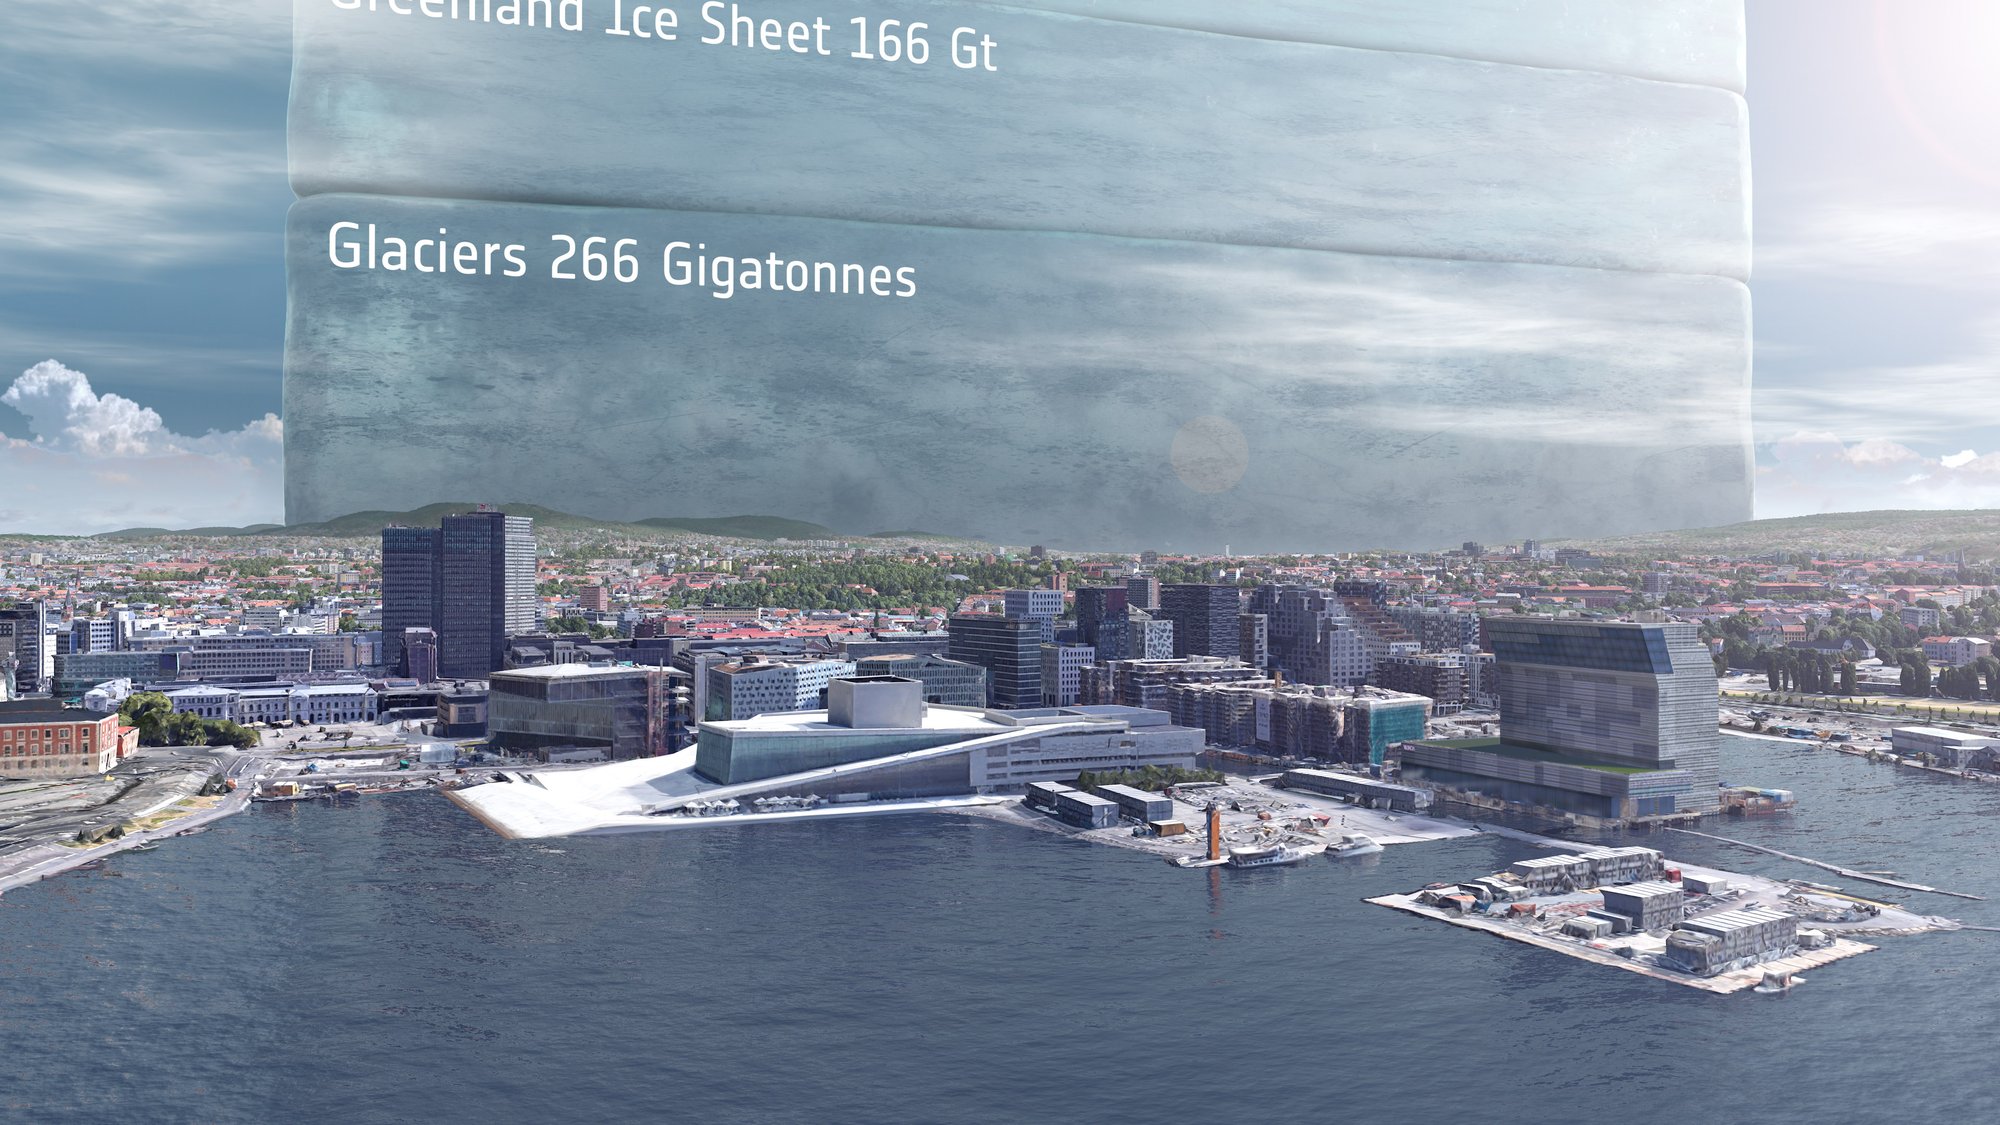 Annual global ice loss - a cube towering over Oslo opera house